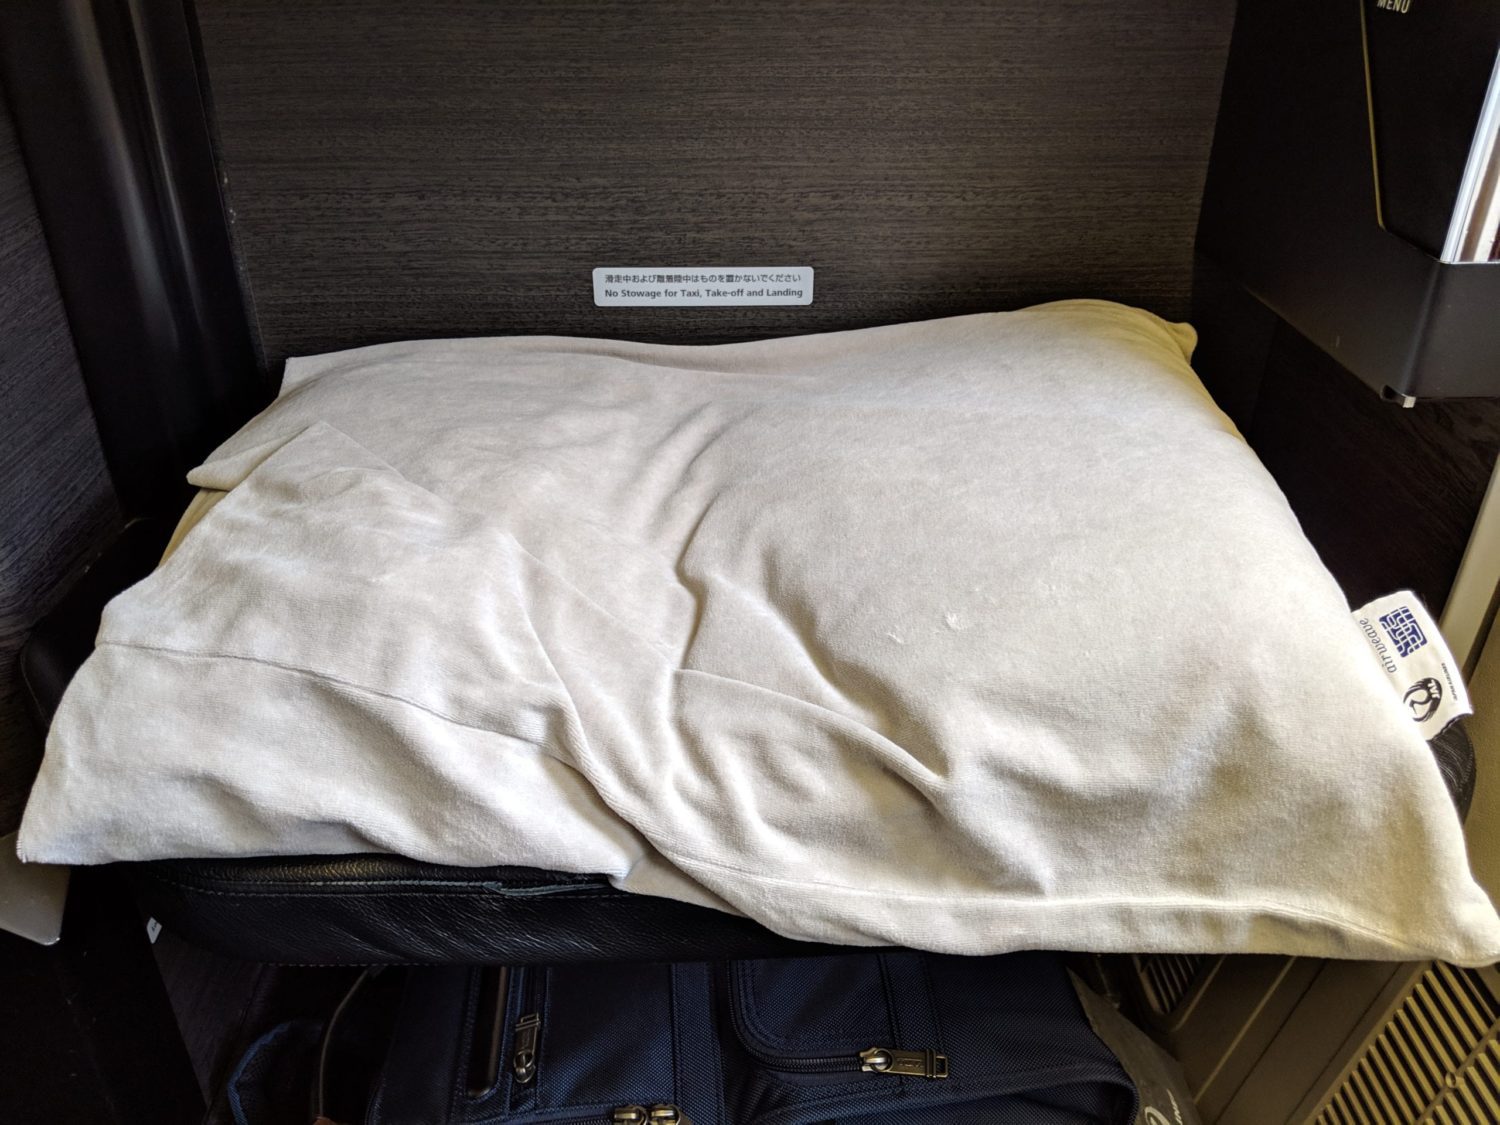 Japan Airlines Business Class Review